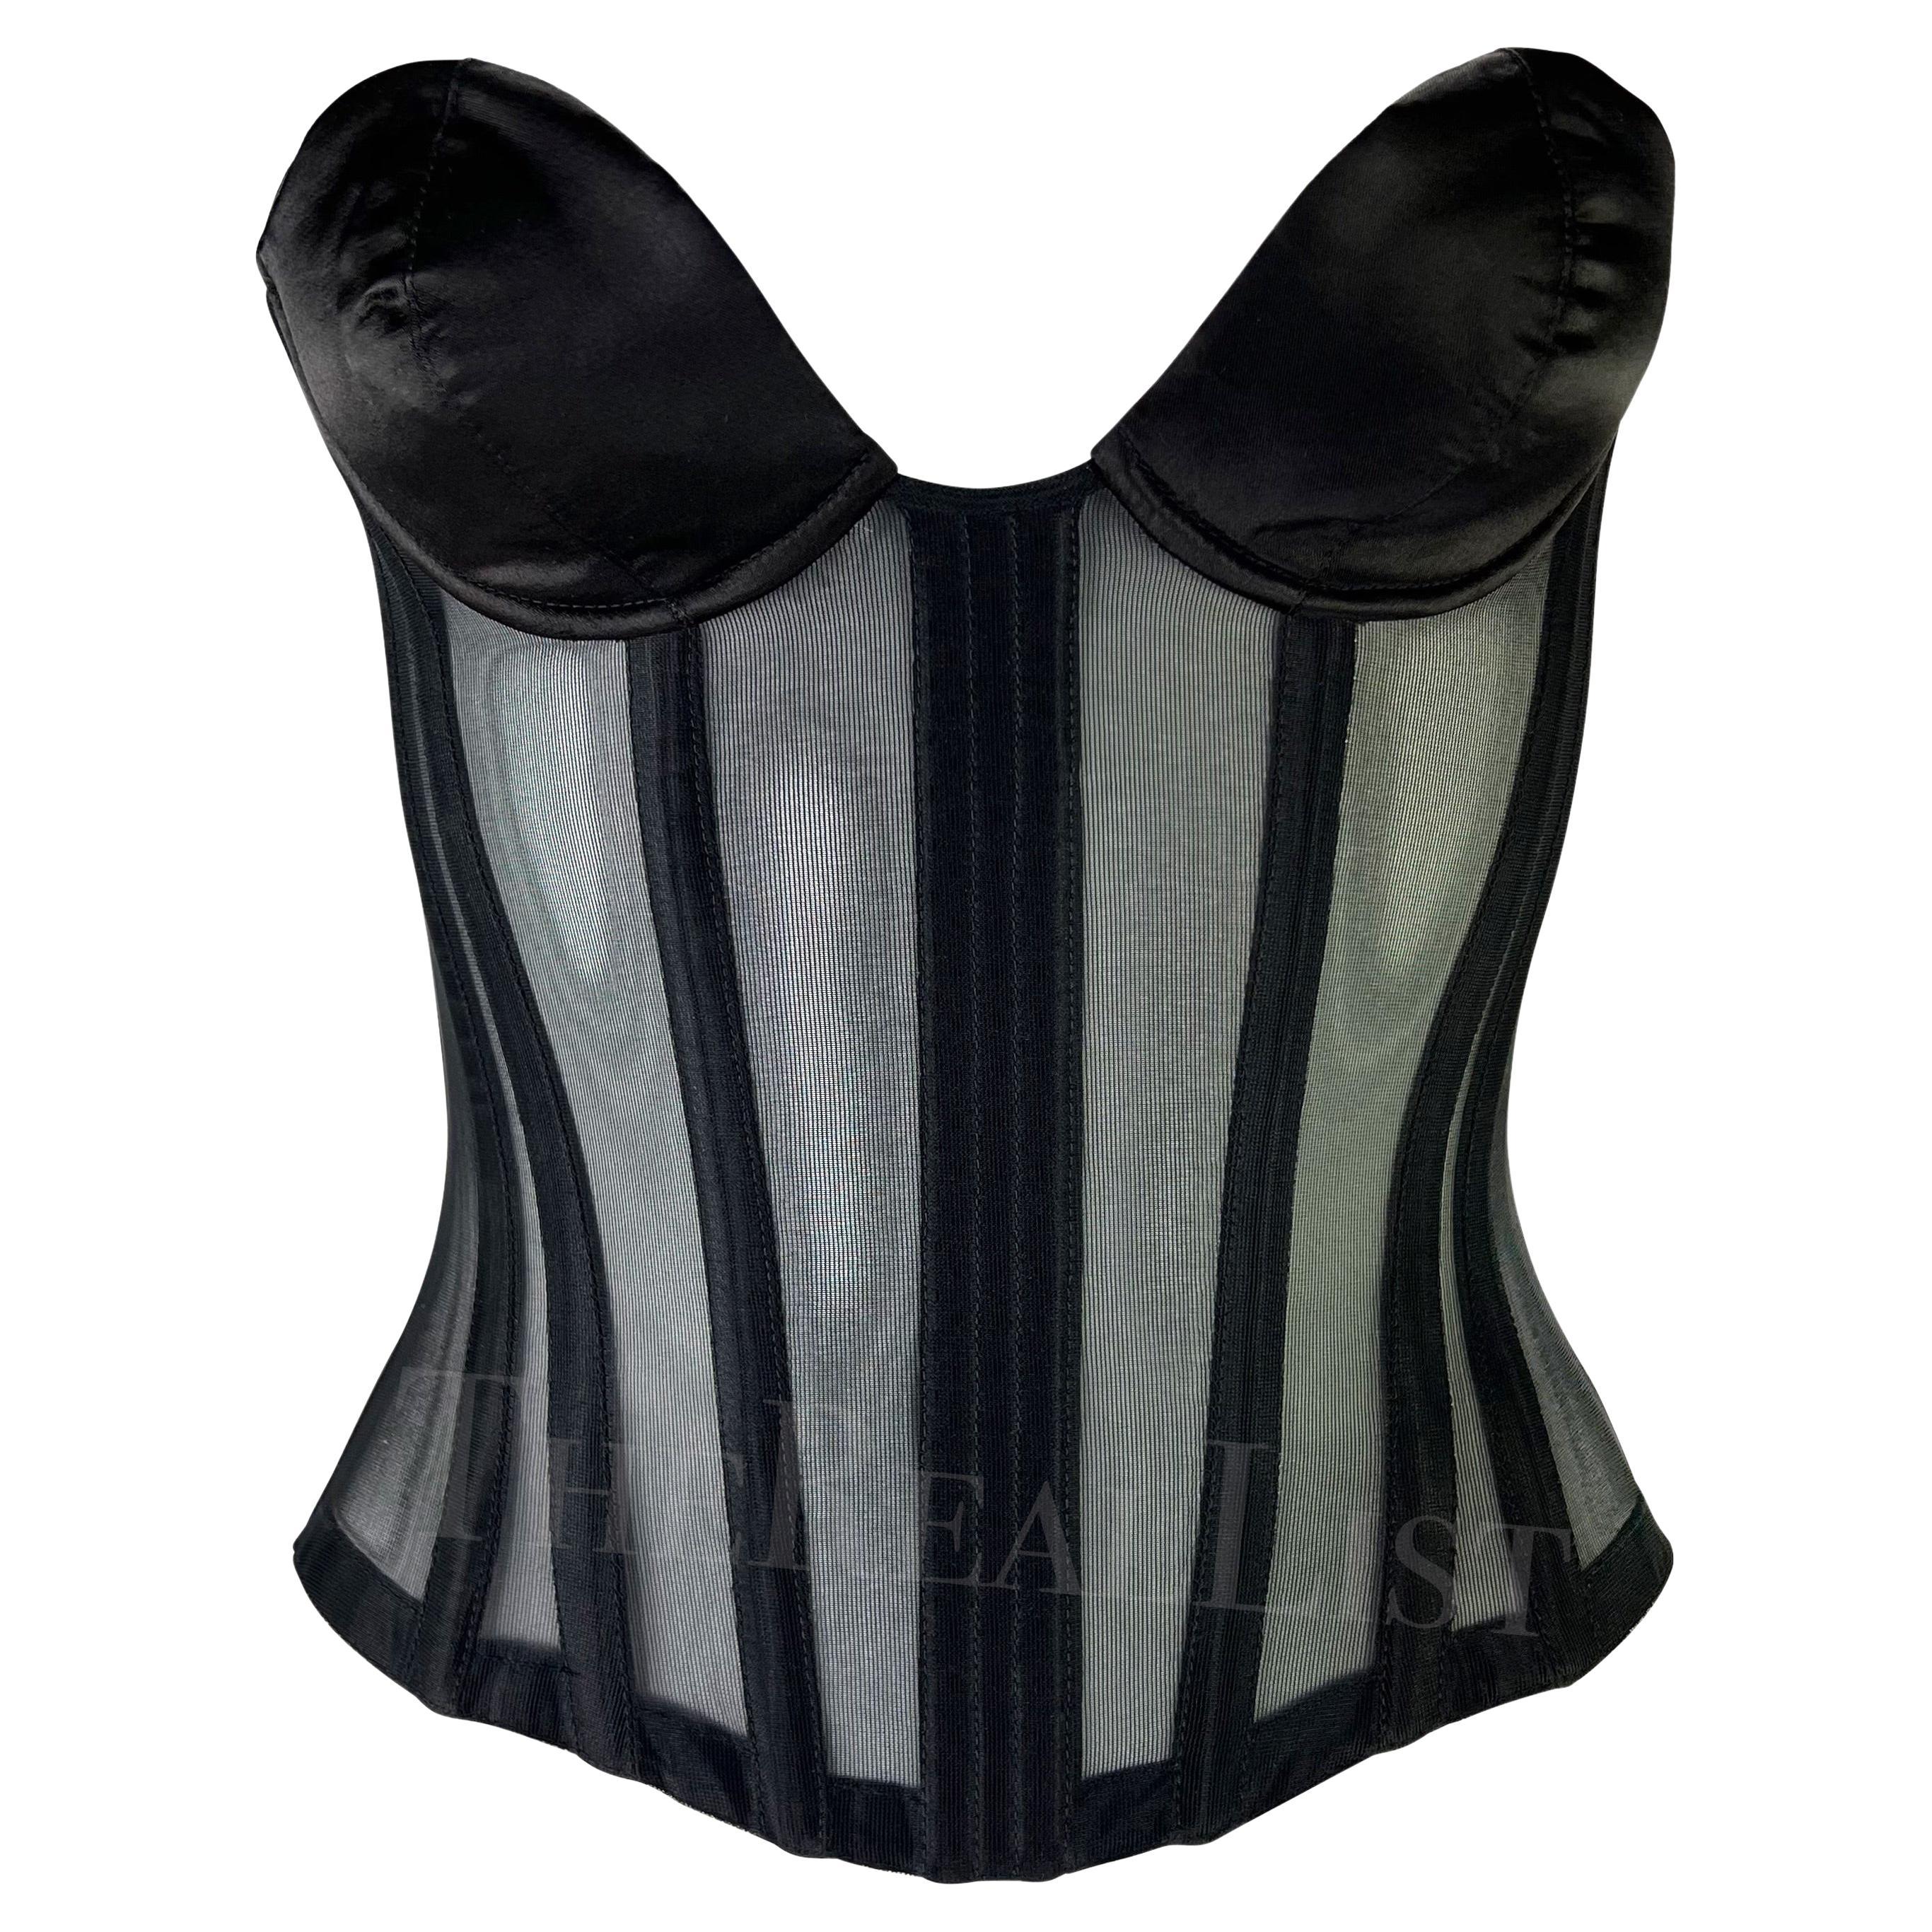 Late 1990s Thierry Mugler Lace-Up Sheer Black Satin Mr. Pearl Corset